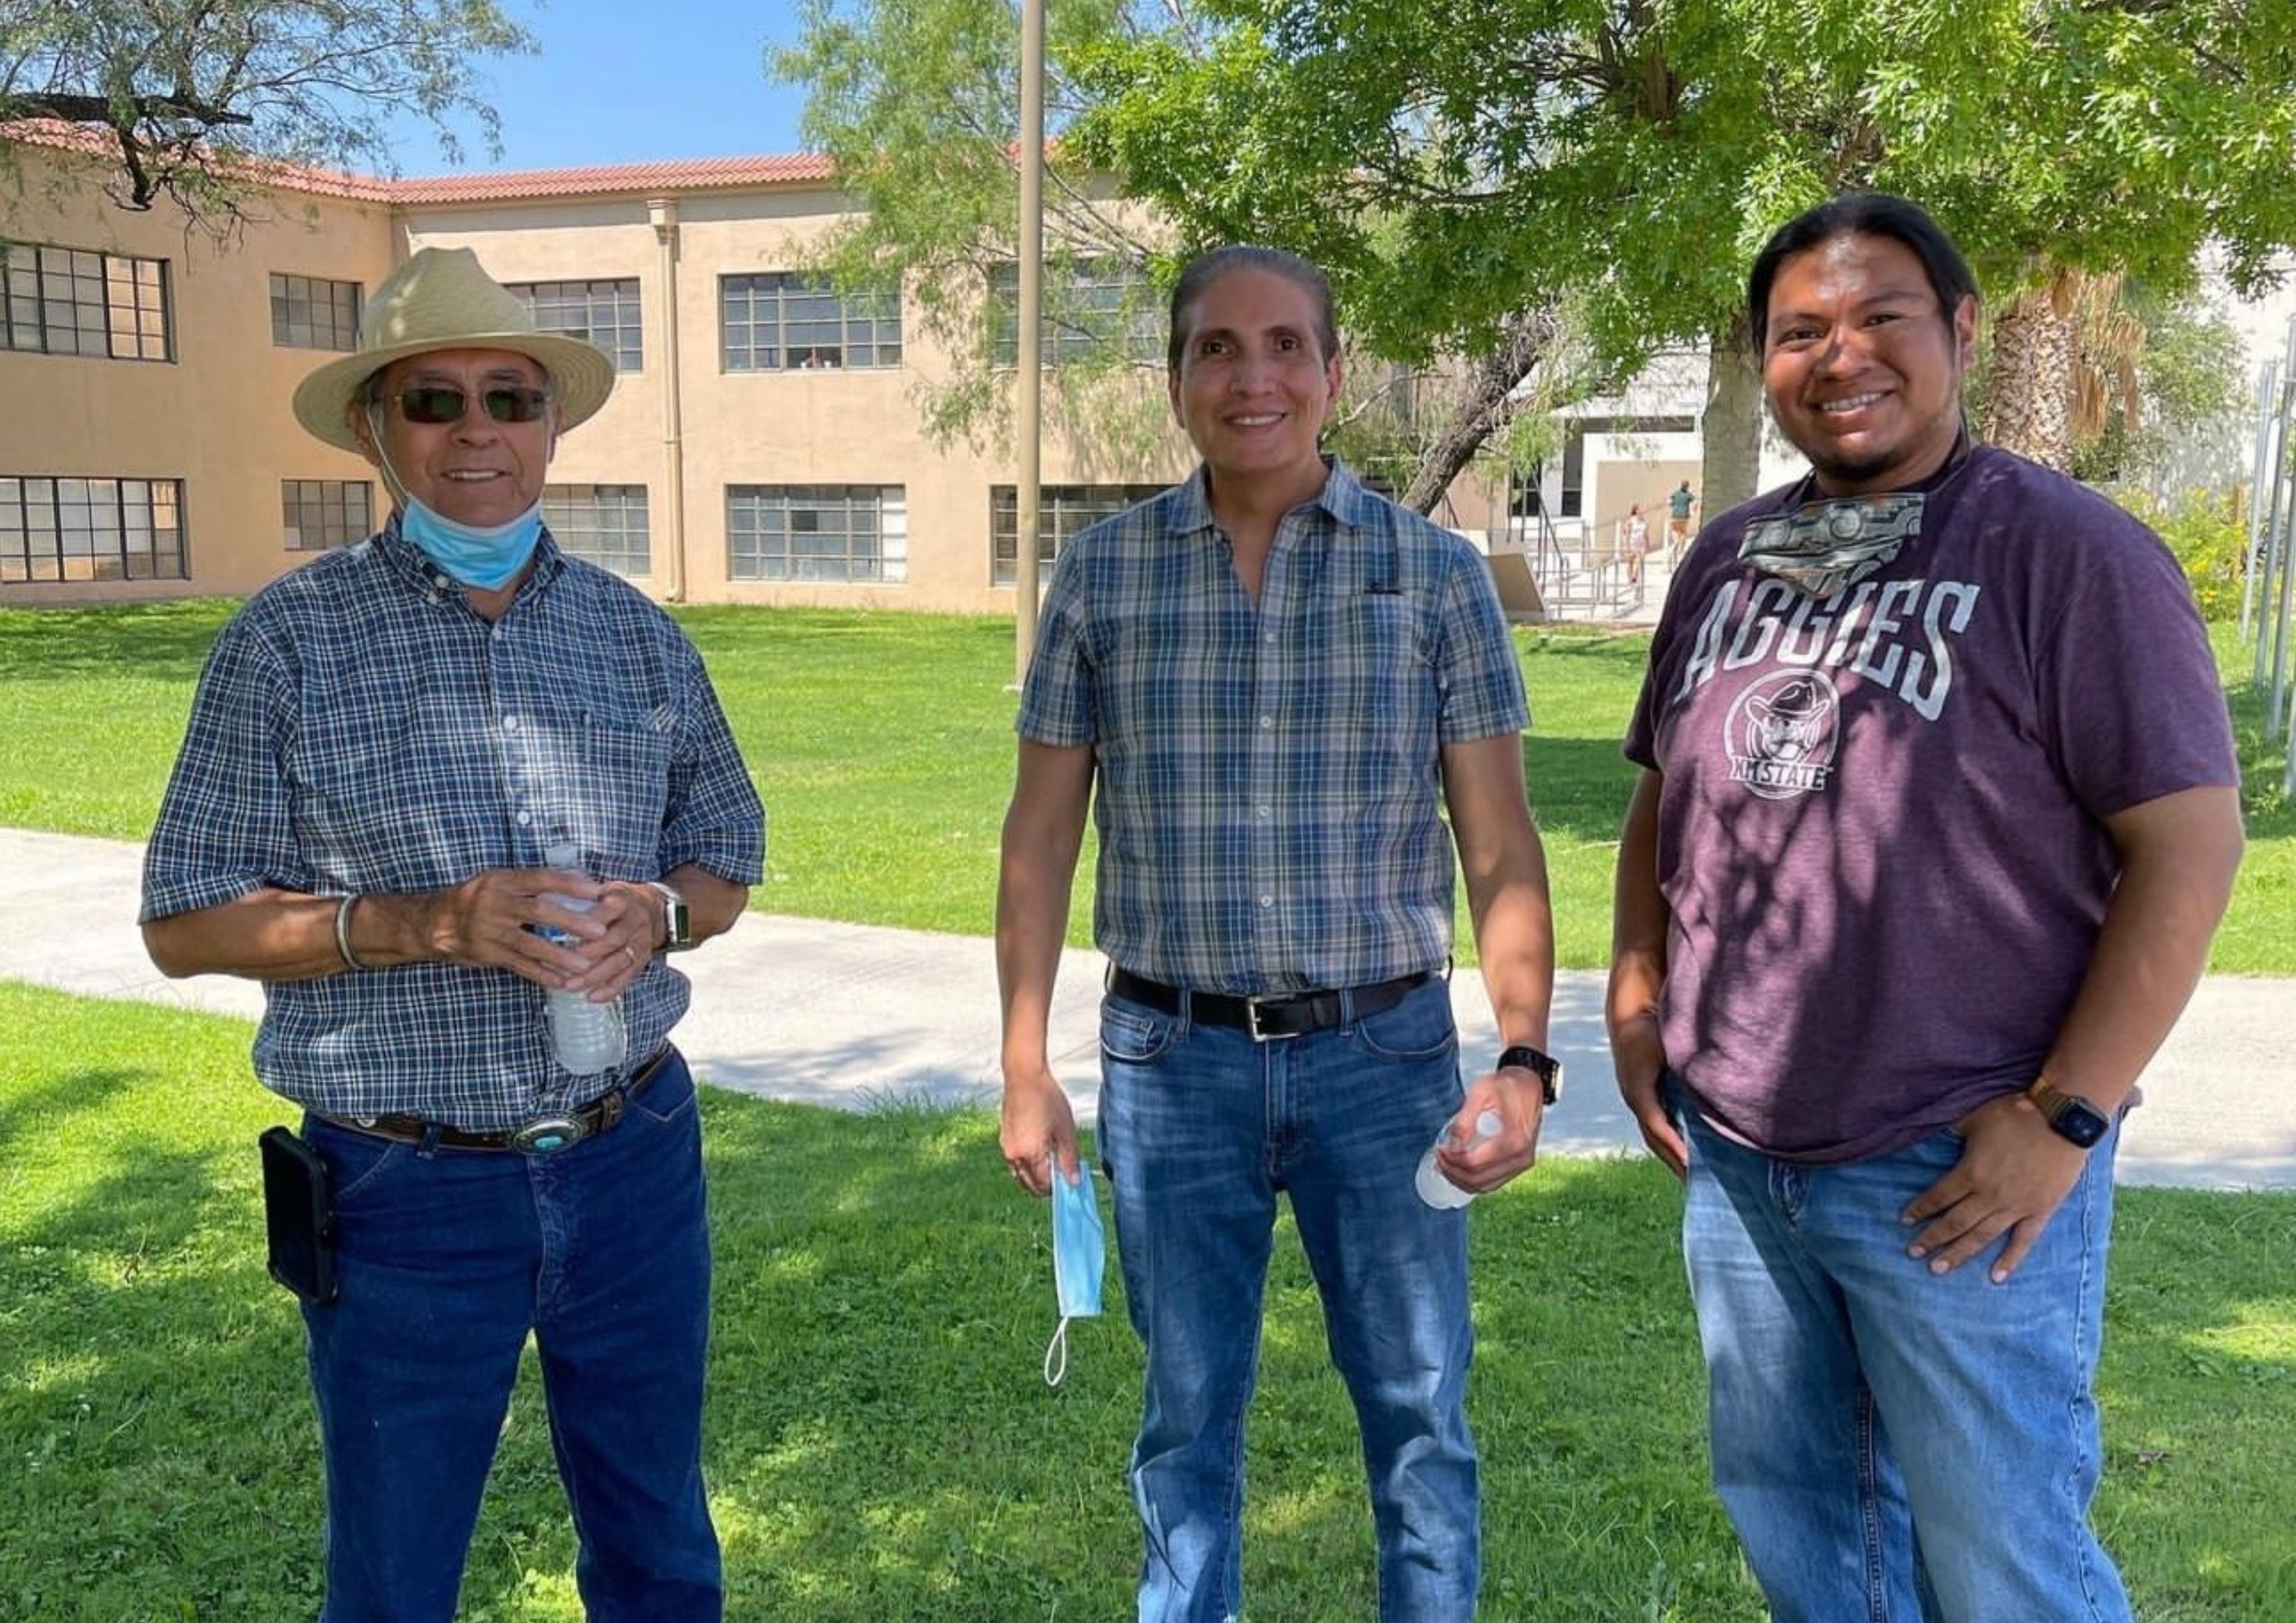 3 Gererations of AIP Directors. The image depicts three men standing outdoors on a green lawn with a large building in the background. They appear to be enjoying a sunny day, as shadows on the grass indicate bright sunlight.  Man on the left: He is wearing a straw hat, sunglasses, a blue plaid shirt, blue jeans, and gray shoes. A light blue face mask hangs below his chin, and he holds a small water bottle and paper cup in his hands. His cell phone is clipped to his belt. Man in the middle: He is wearing a blue and green plaid short-sleeved shirt, blue jeans, and black shoes. He holds a white face mask in his left hand and a water bottle in his right hand. Man on the right: He is wearing a maroon t-shirt with "AGGIES" and a logo printed on it, blue jeans, and black shoes. He has a black watch on his left wrist and a face mask around his neck. In the background, there is a sandy-colored building with many windows. Trees with lush green foliage are also visible, providing shade to some areas of the scene. The sky is clear and blue, indicating pleasant weather.